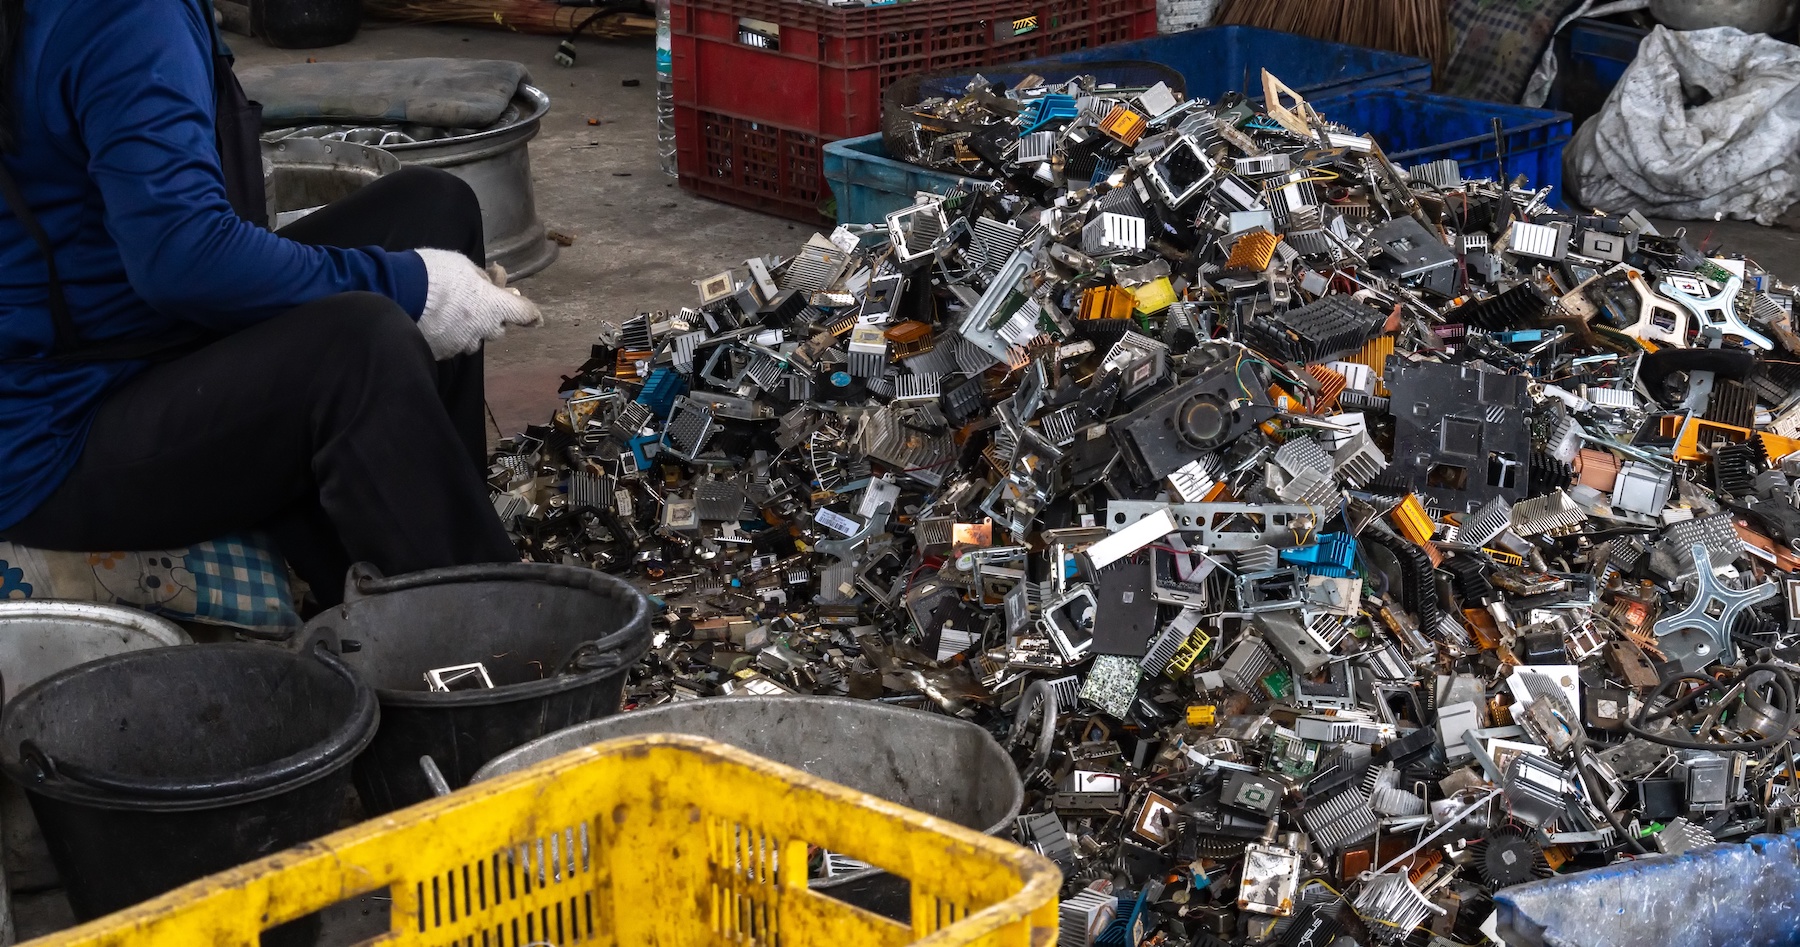 Scrap yard of electronic waste for recycling.